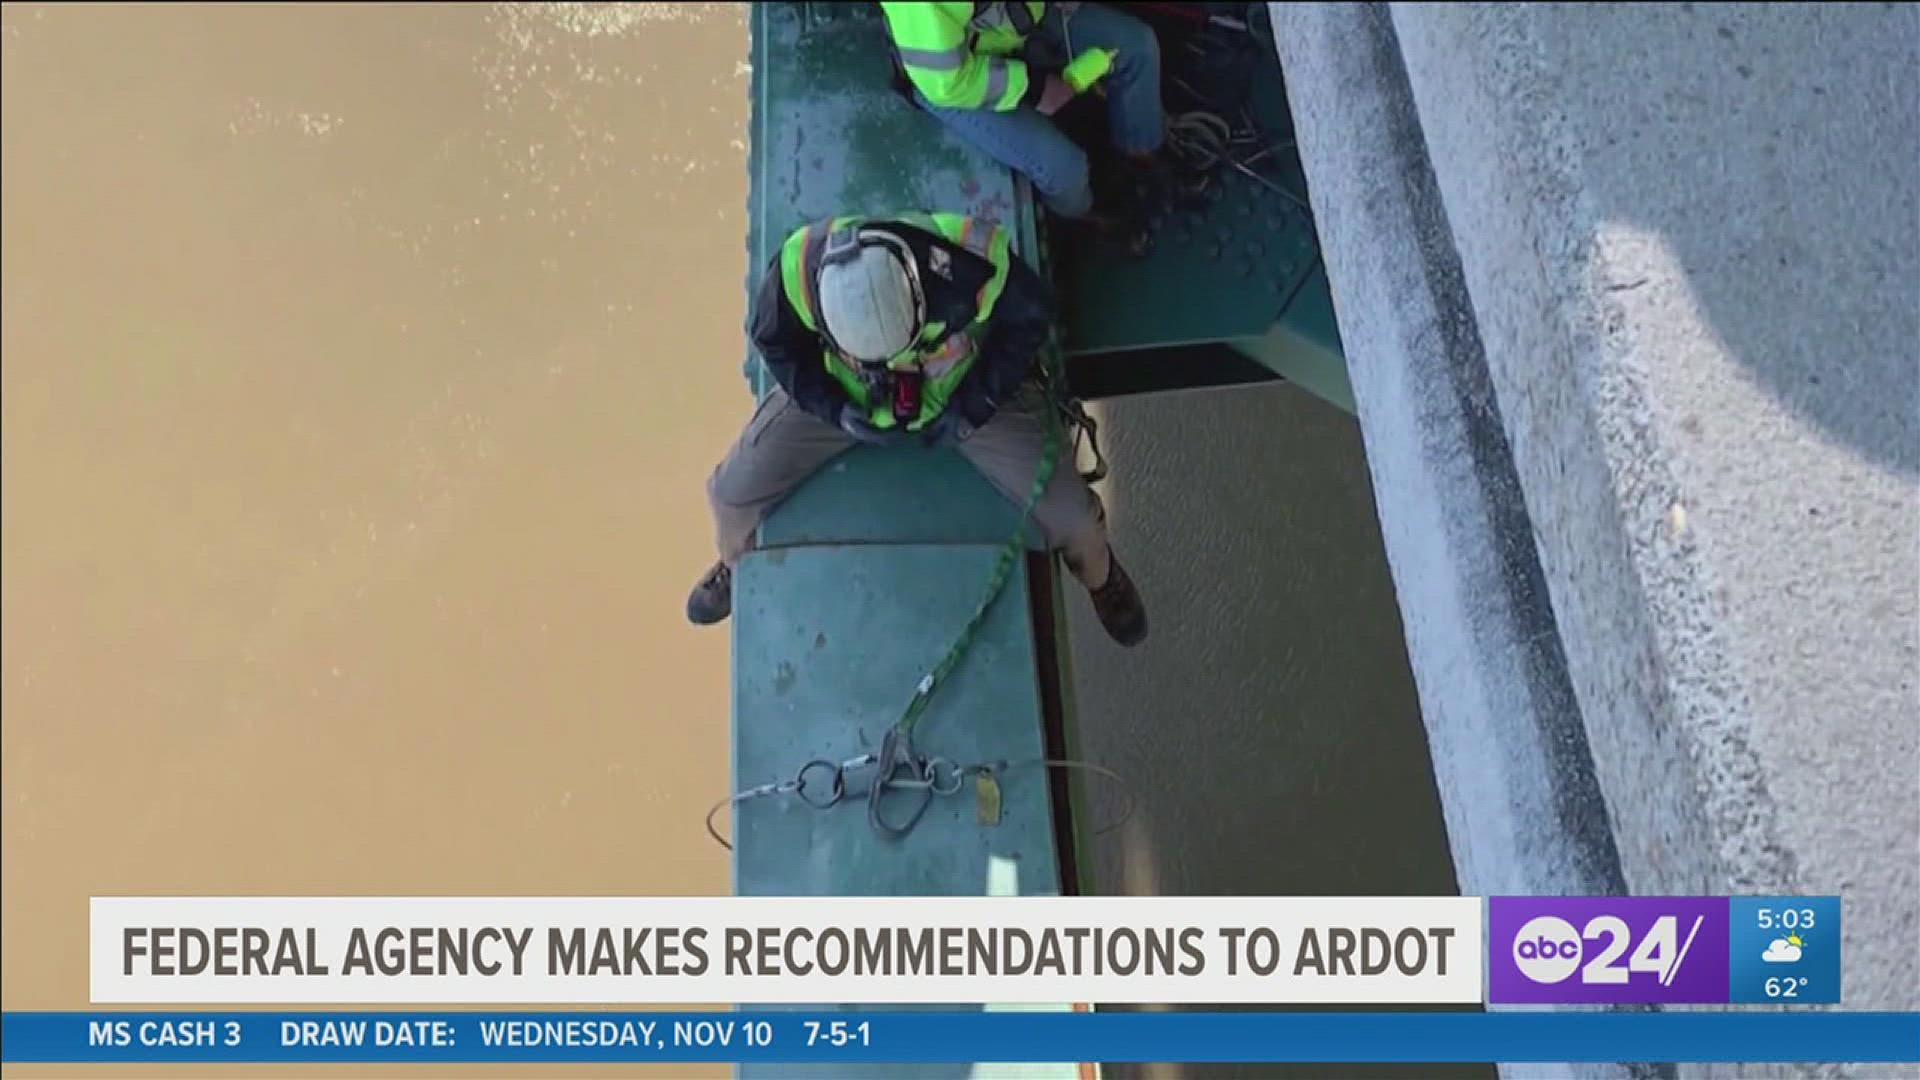 The federal agency makes several recommendations to ARDOT, including more in-depth inspections and more qualified personnel.